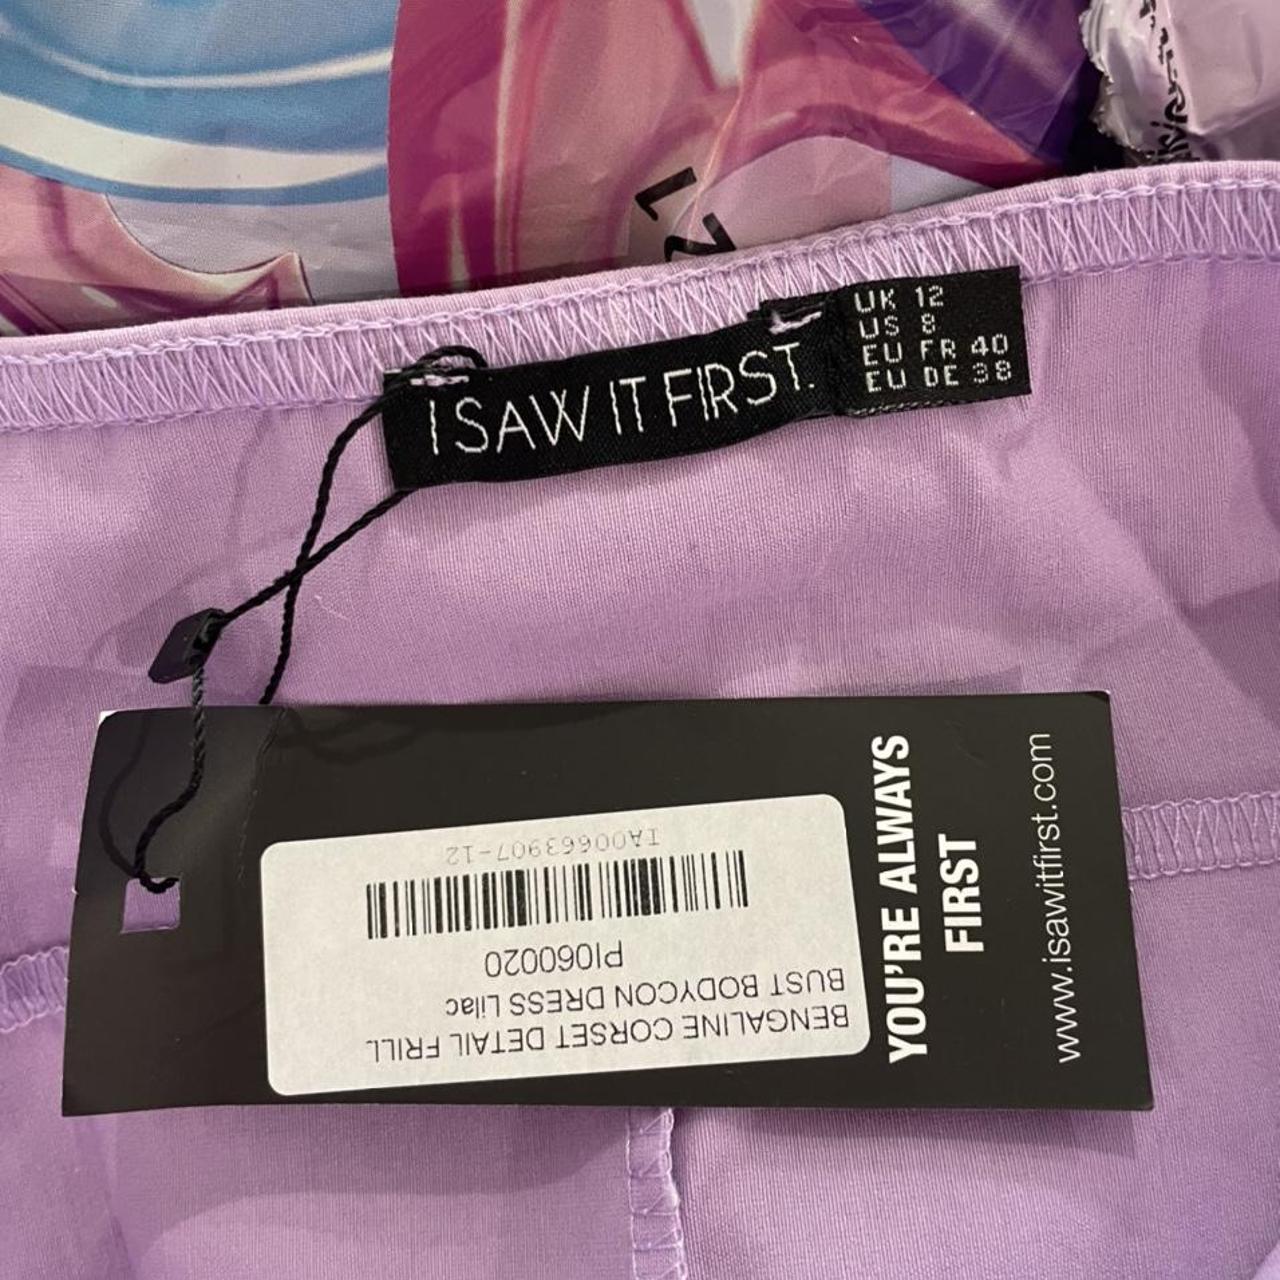 BNWT ISAWITFIRST lilac corset dress, size 10. Never... - Depop